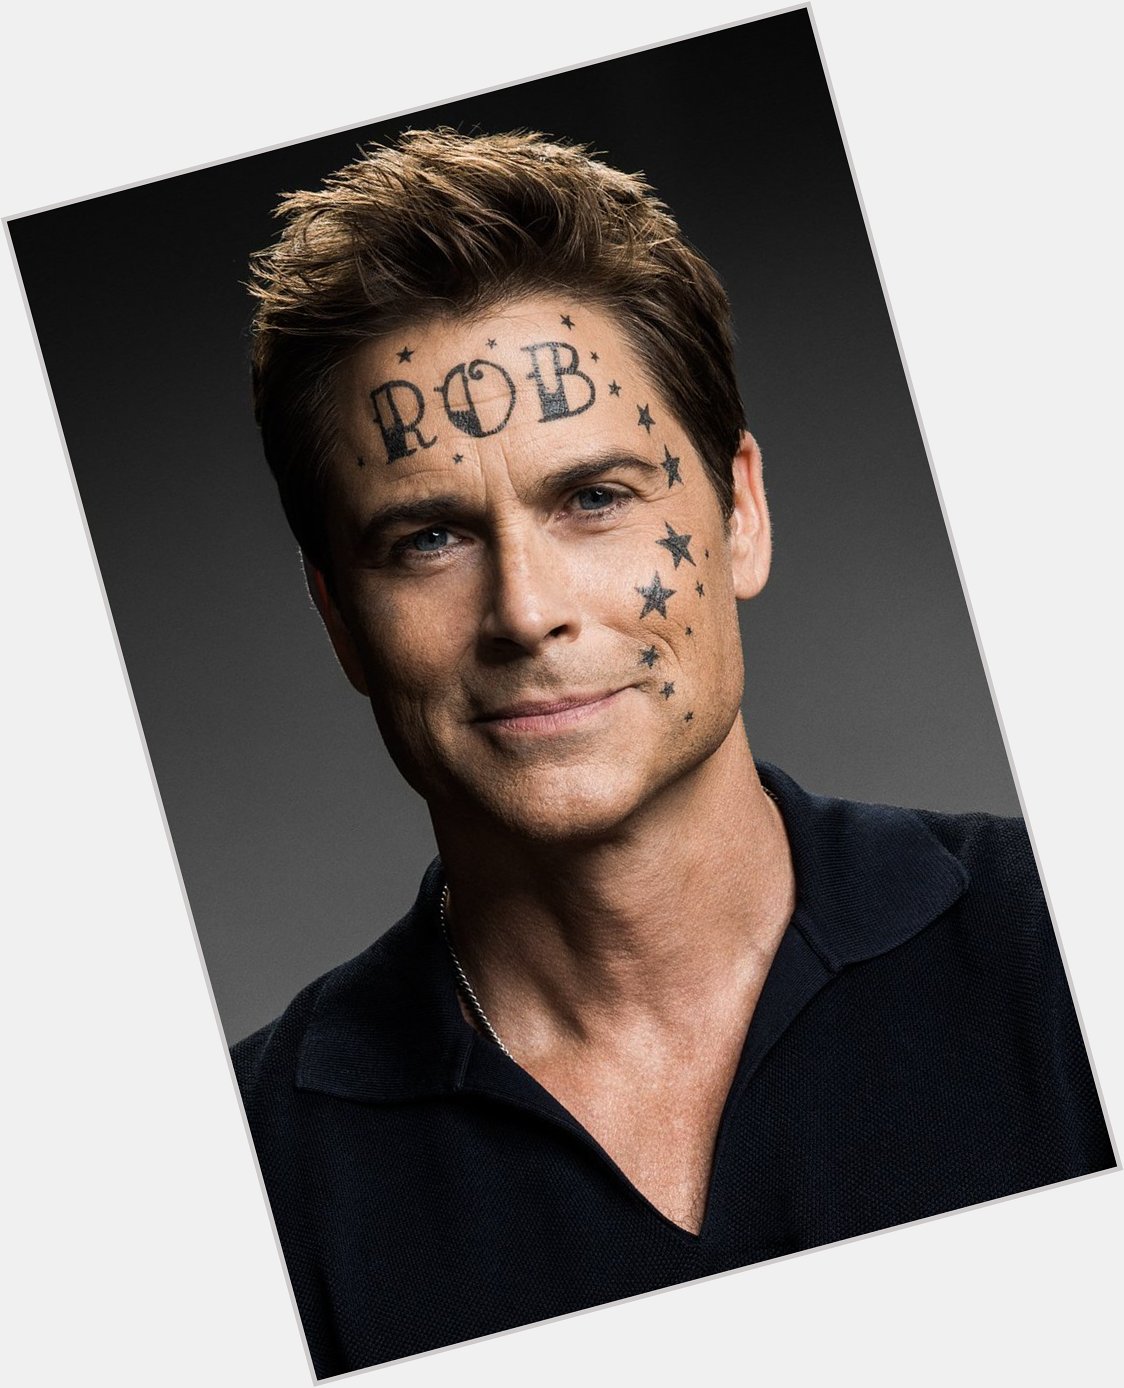 Happy Birthday to Rob Lowe, who turns 53 today! 